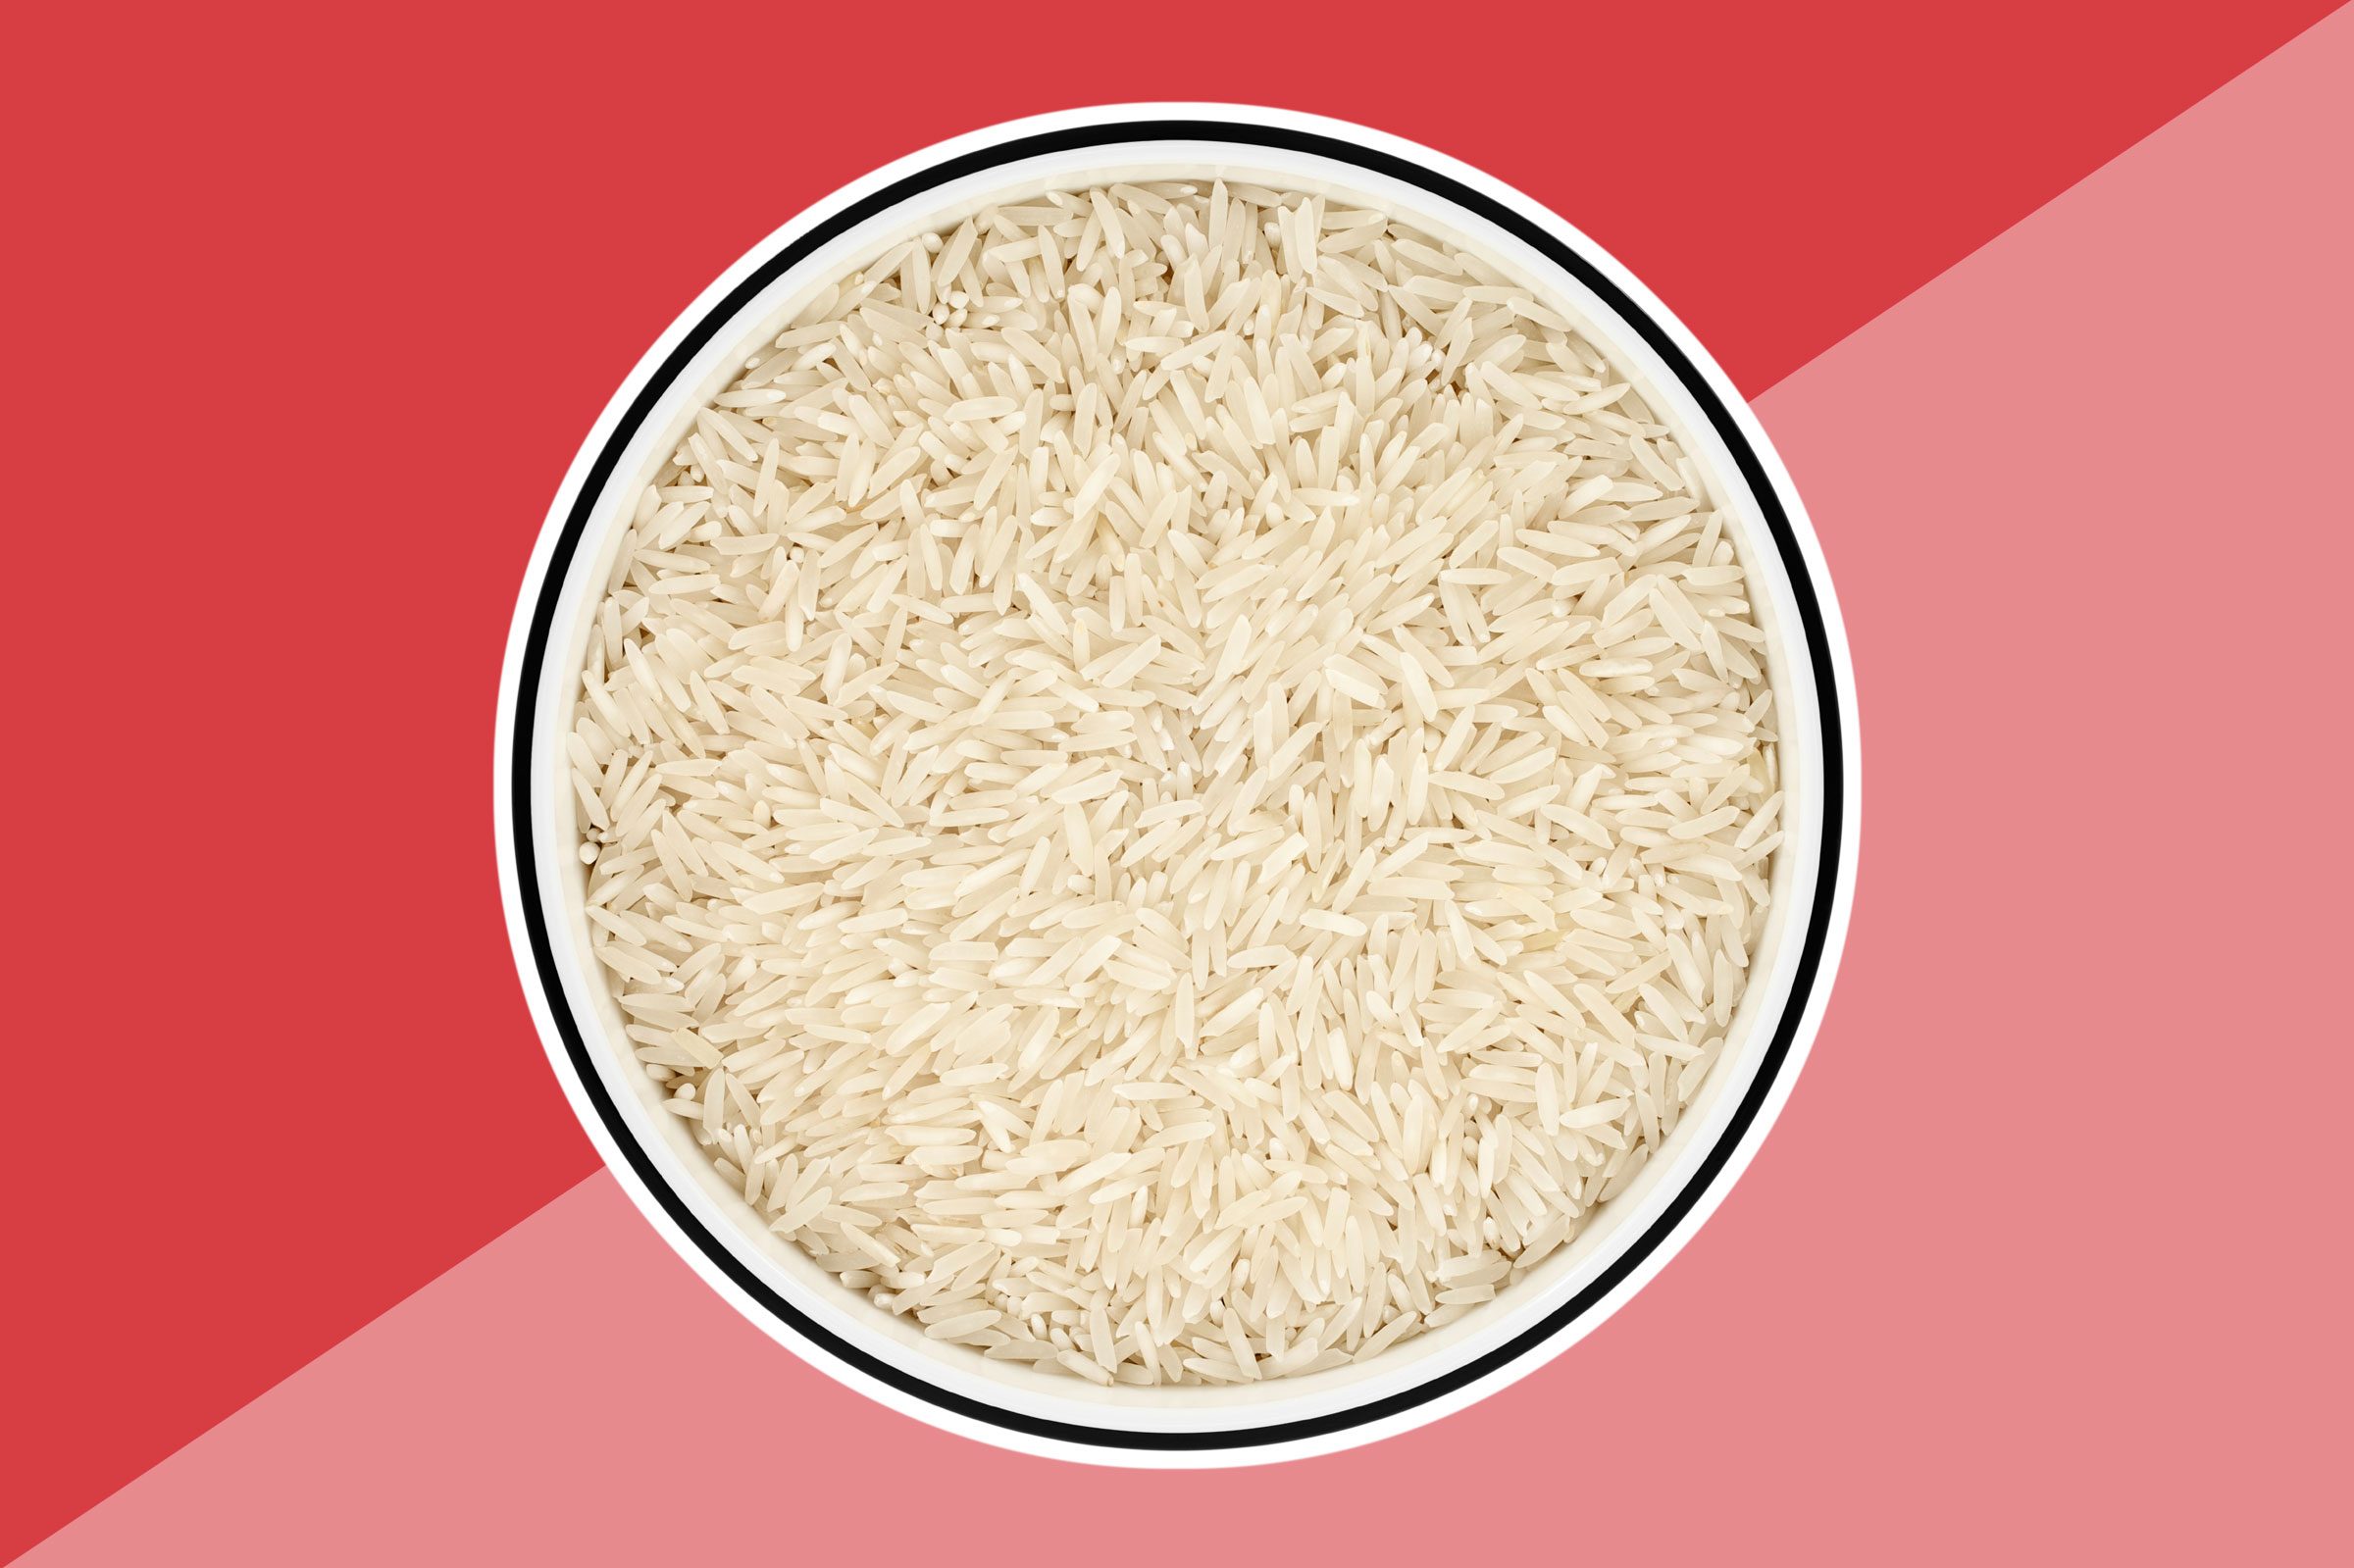 What country does rice come from?